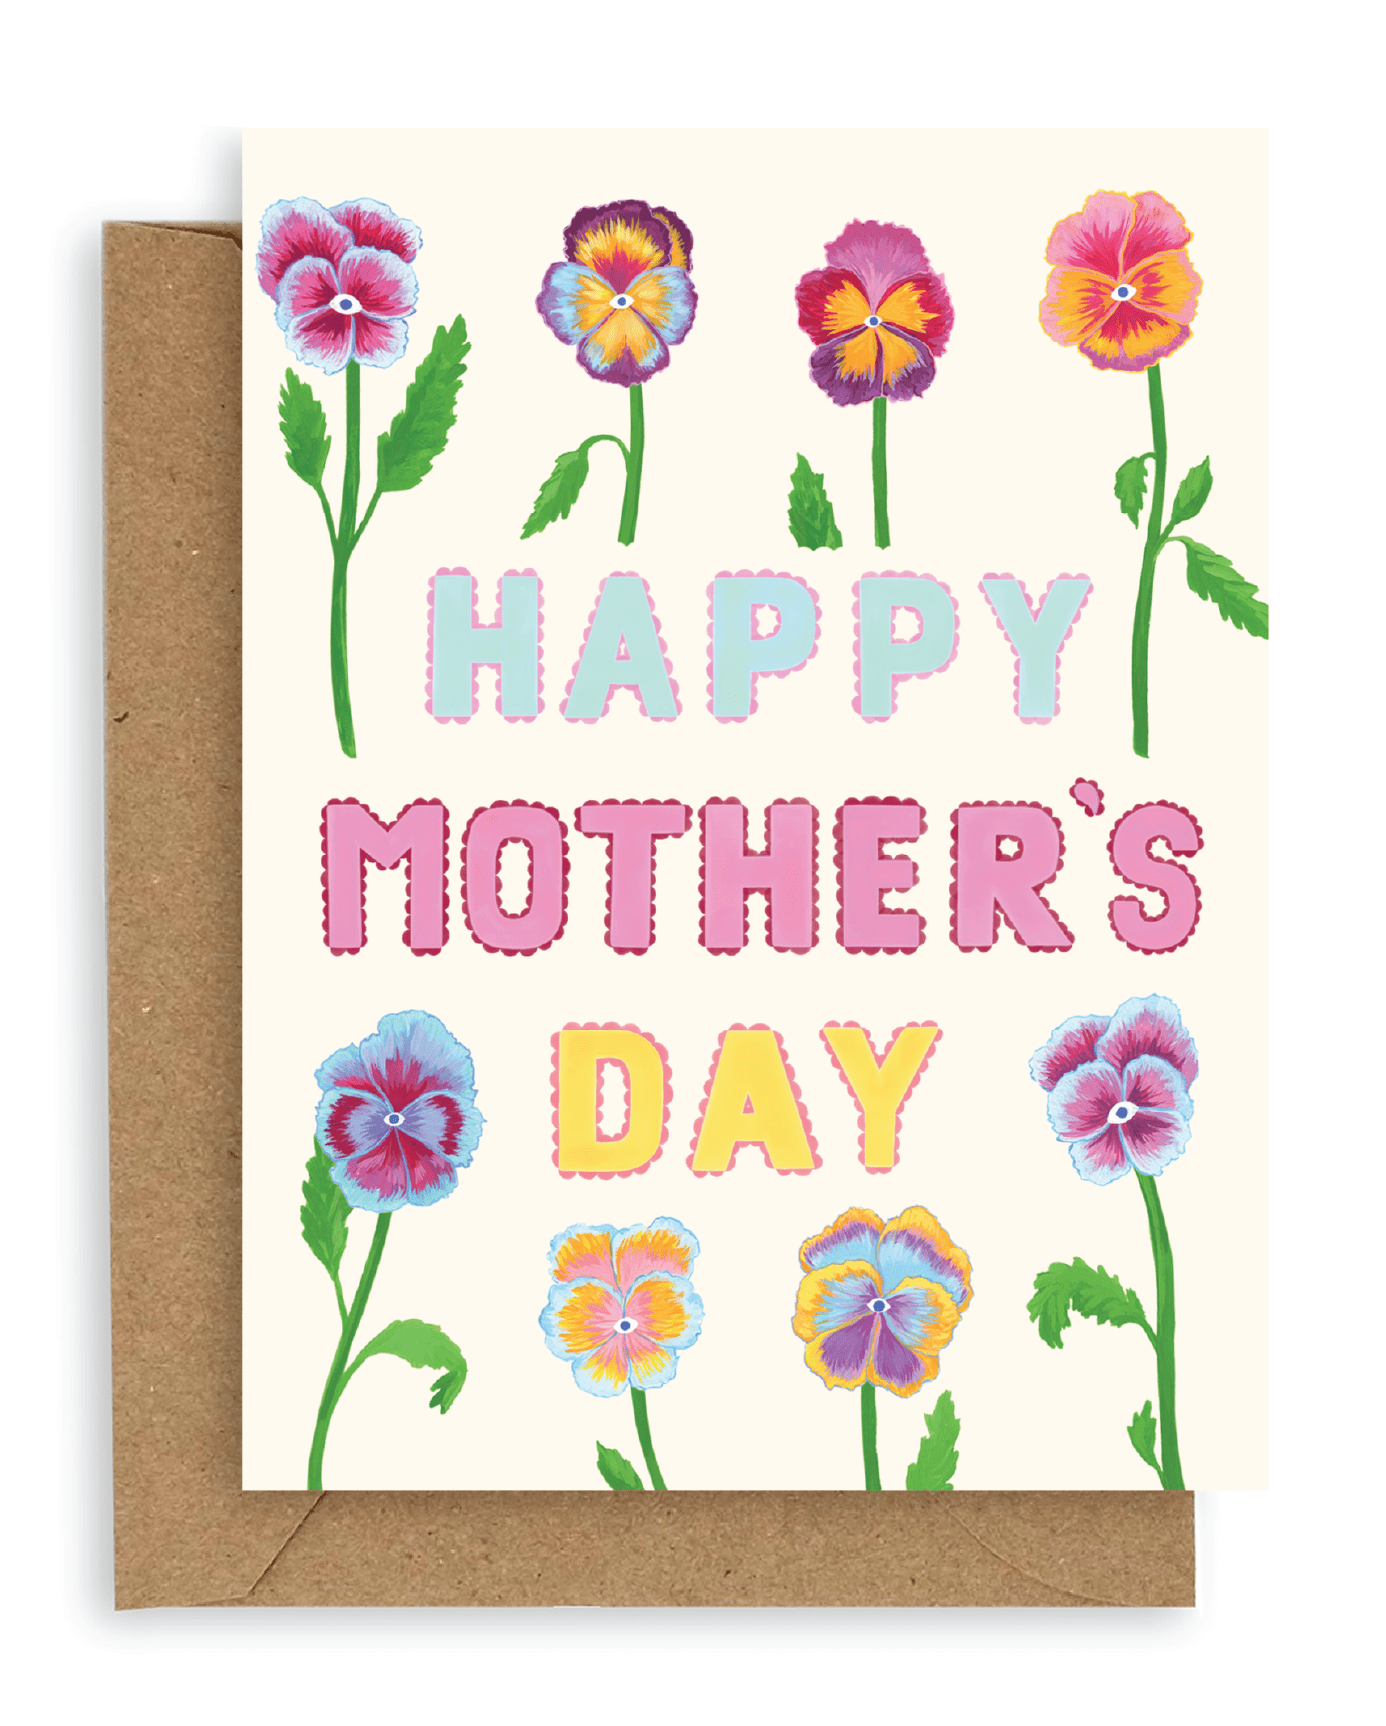 Pansies Happy Mother’s Day Card